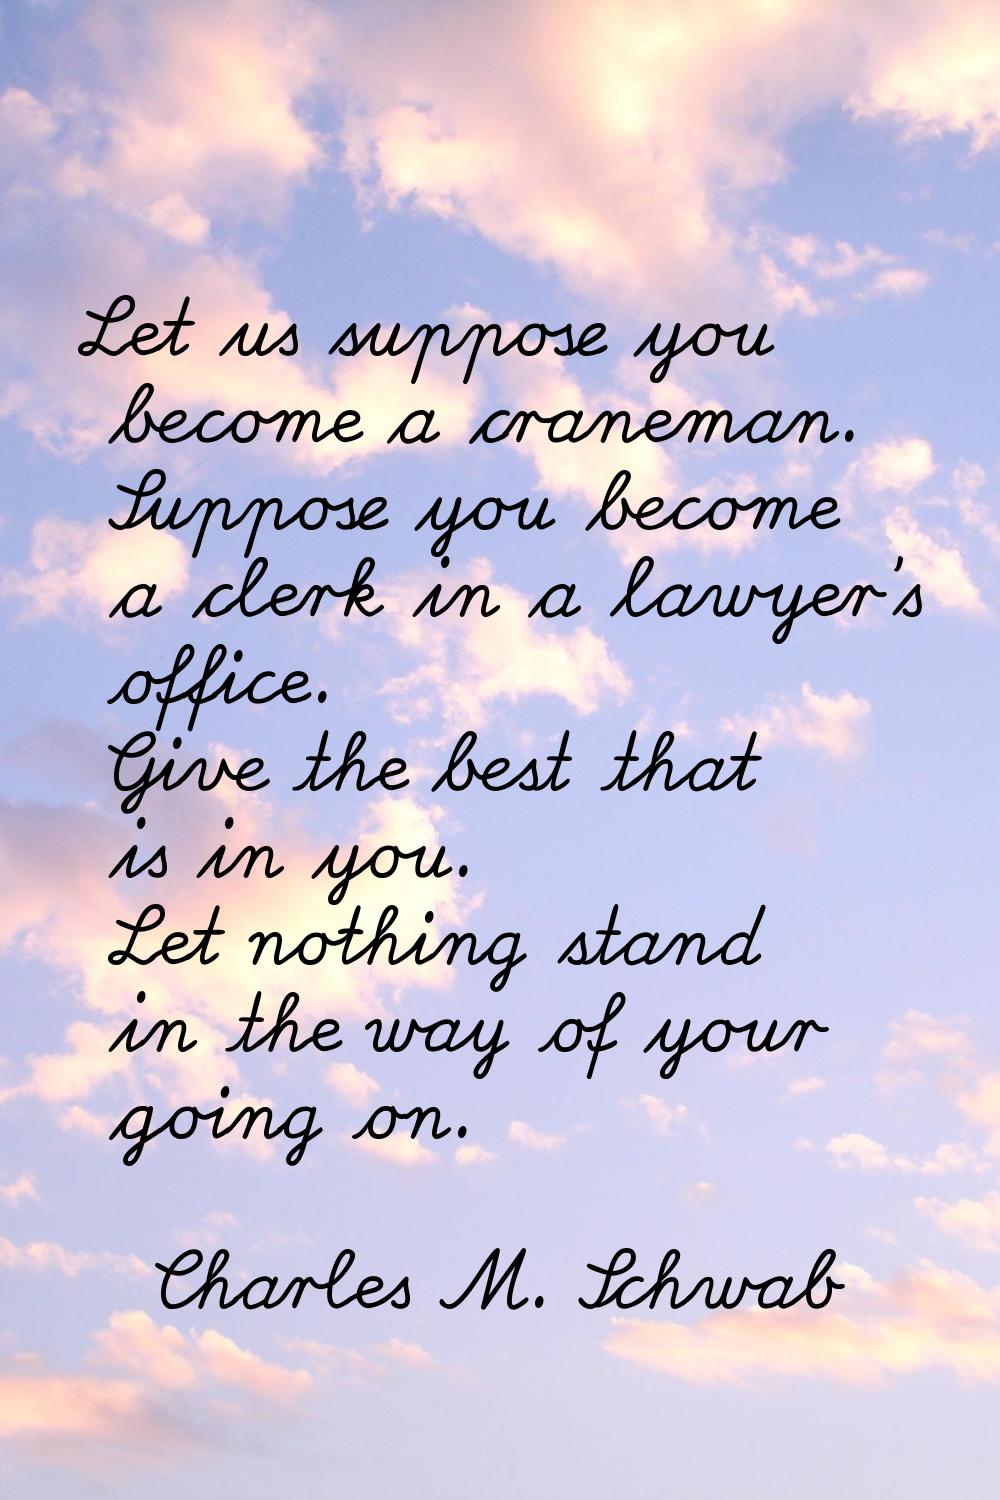 Let us suppose you become a craneman. Suppose you become a clerk in a lawyer's office. Give the bes